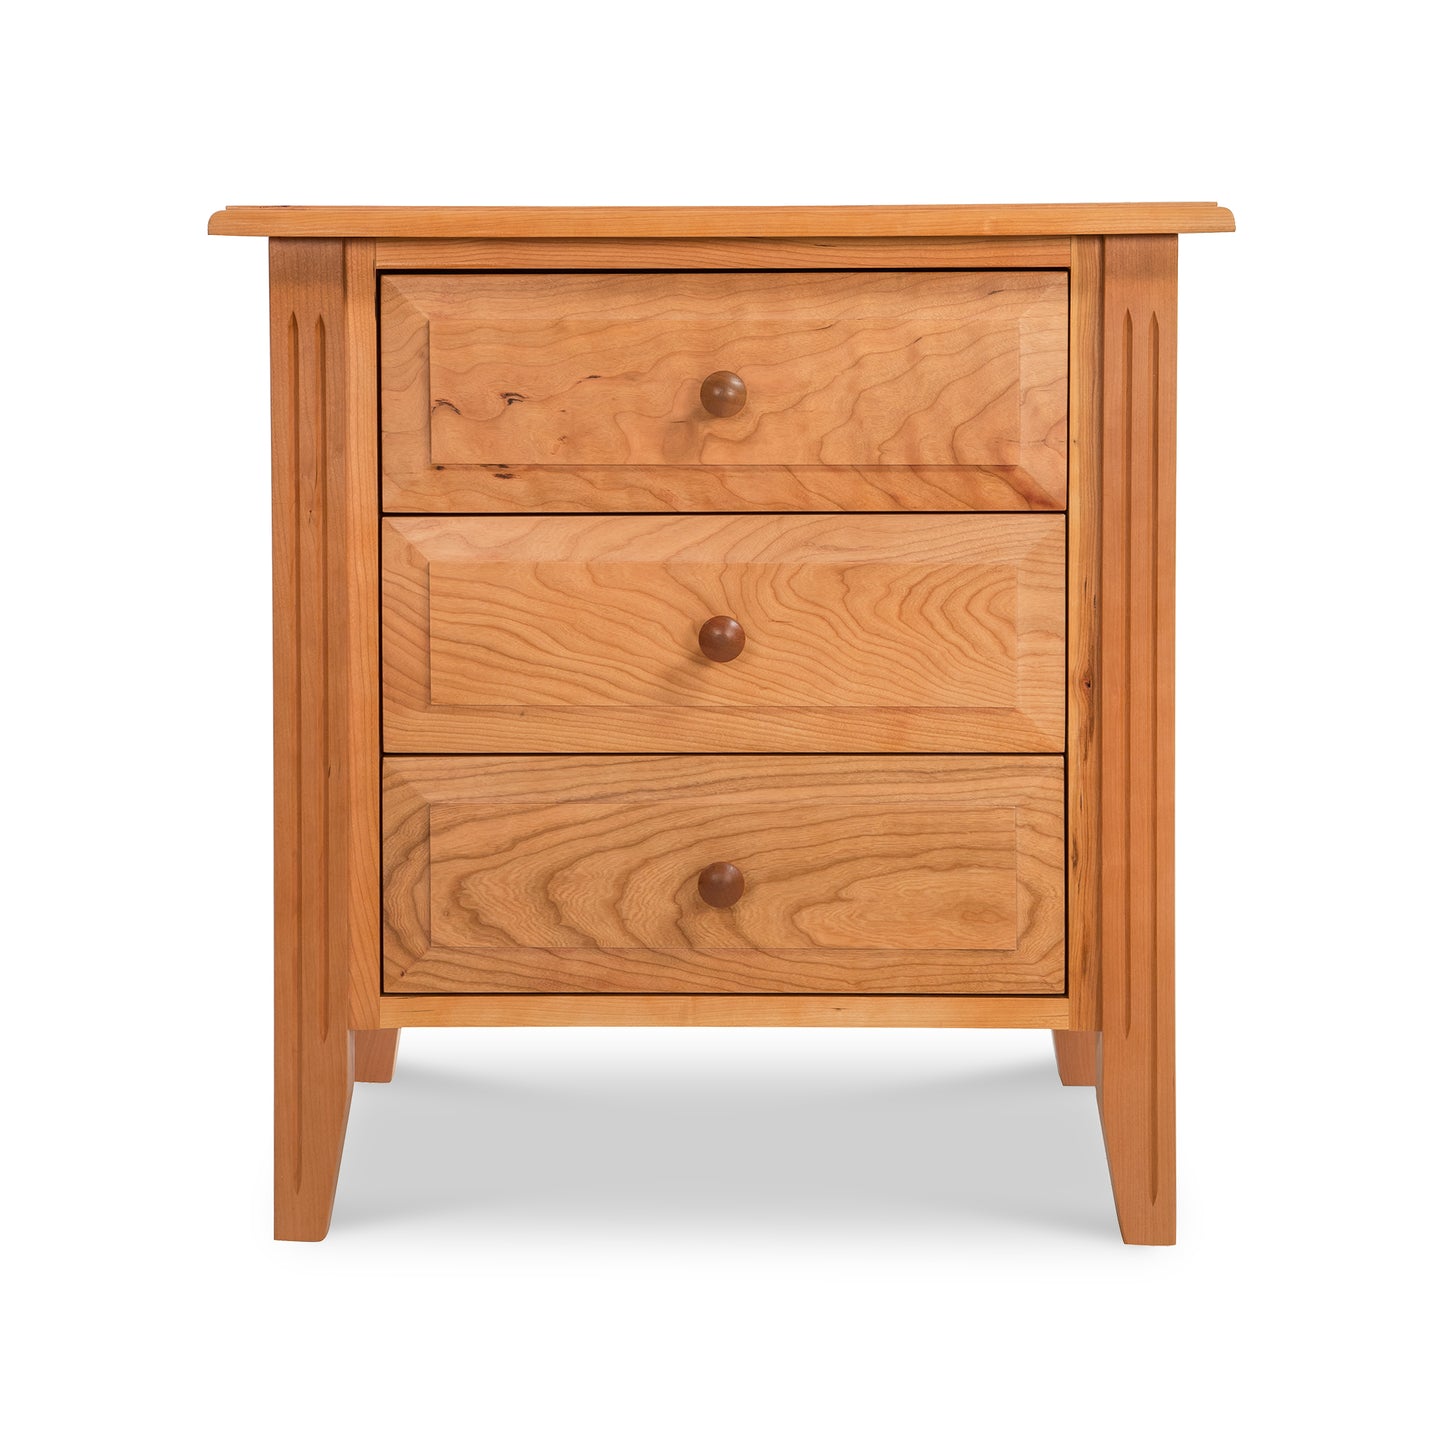 A Lyndon Furniture Renfrew Shaker 3-Drawer Nightstand, ideal for organizing your bedroom.